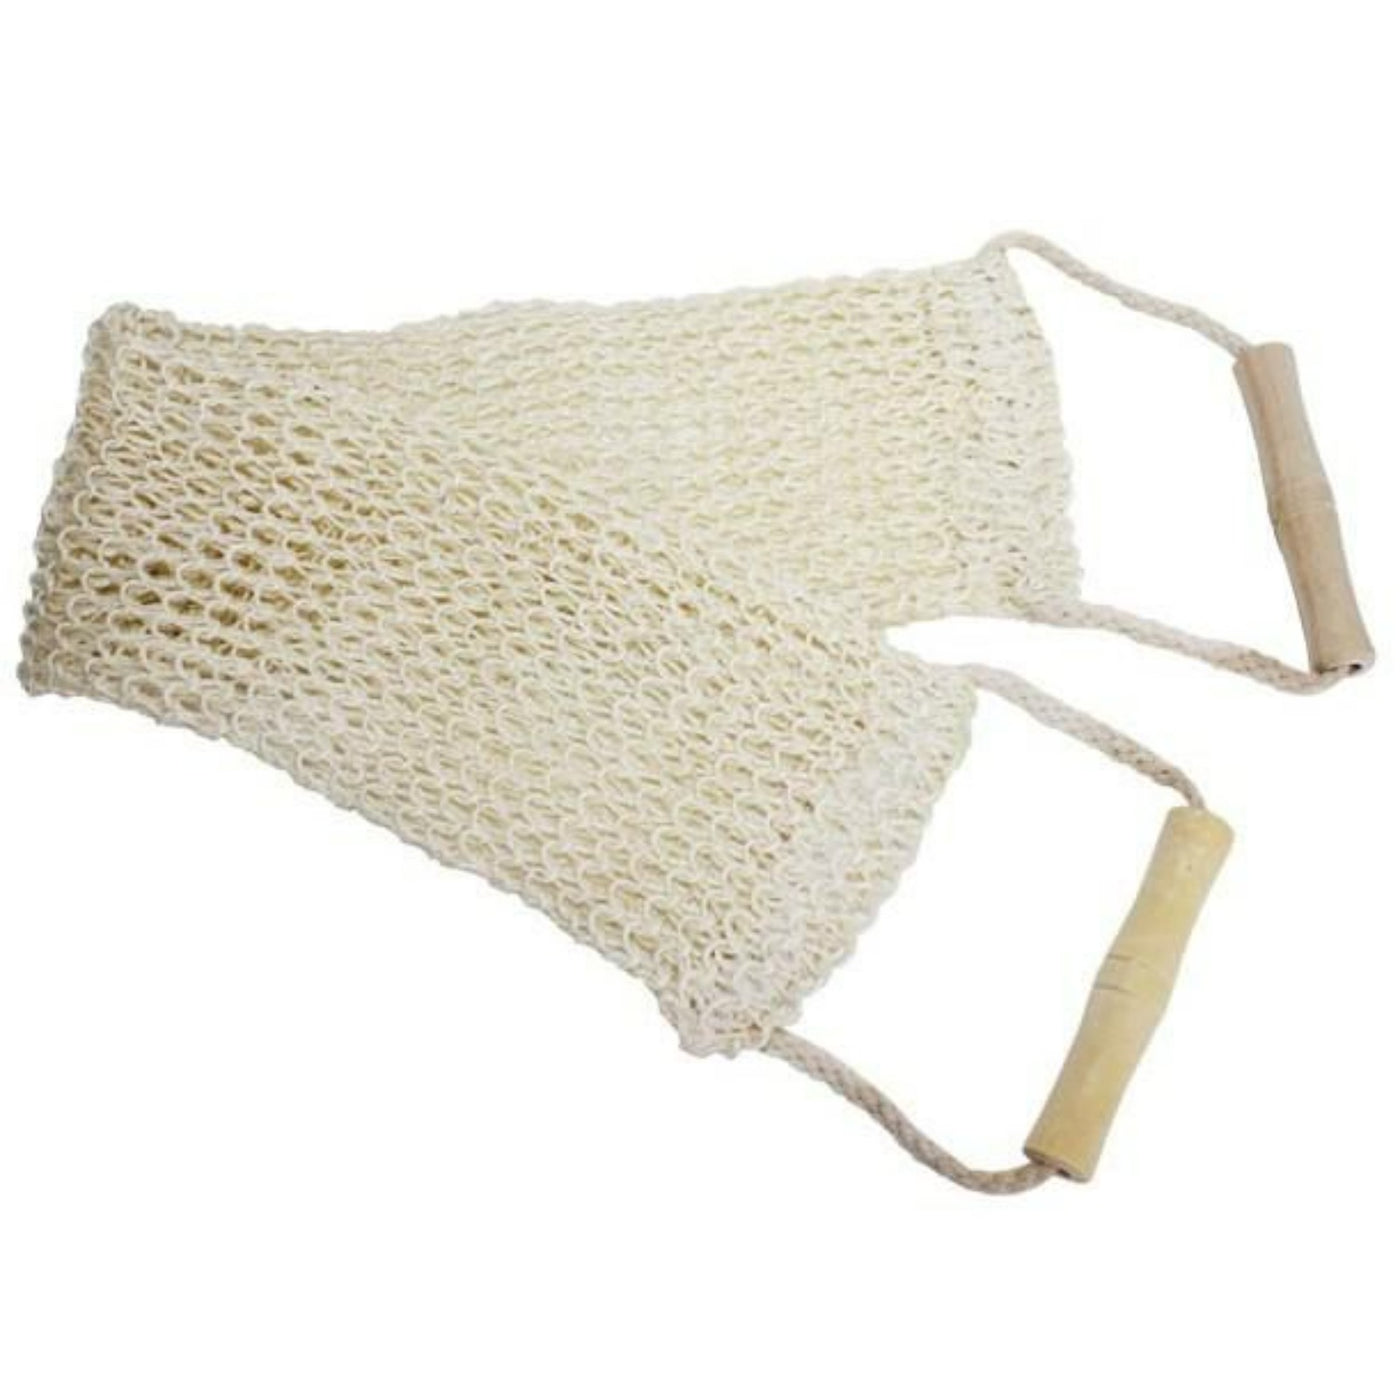 Luxury Jute Back Scrub With Wooden Handles.